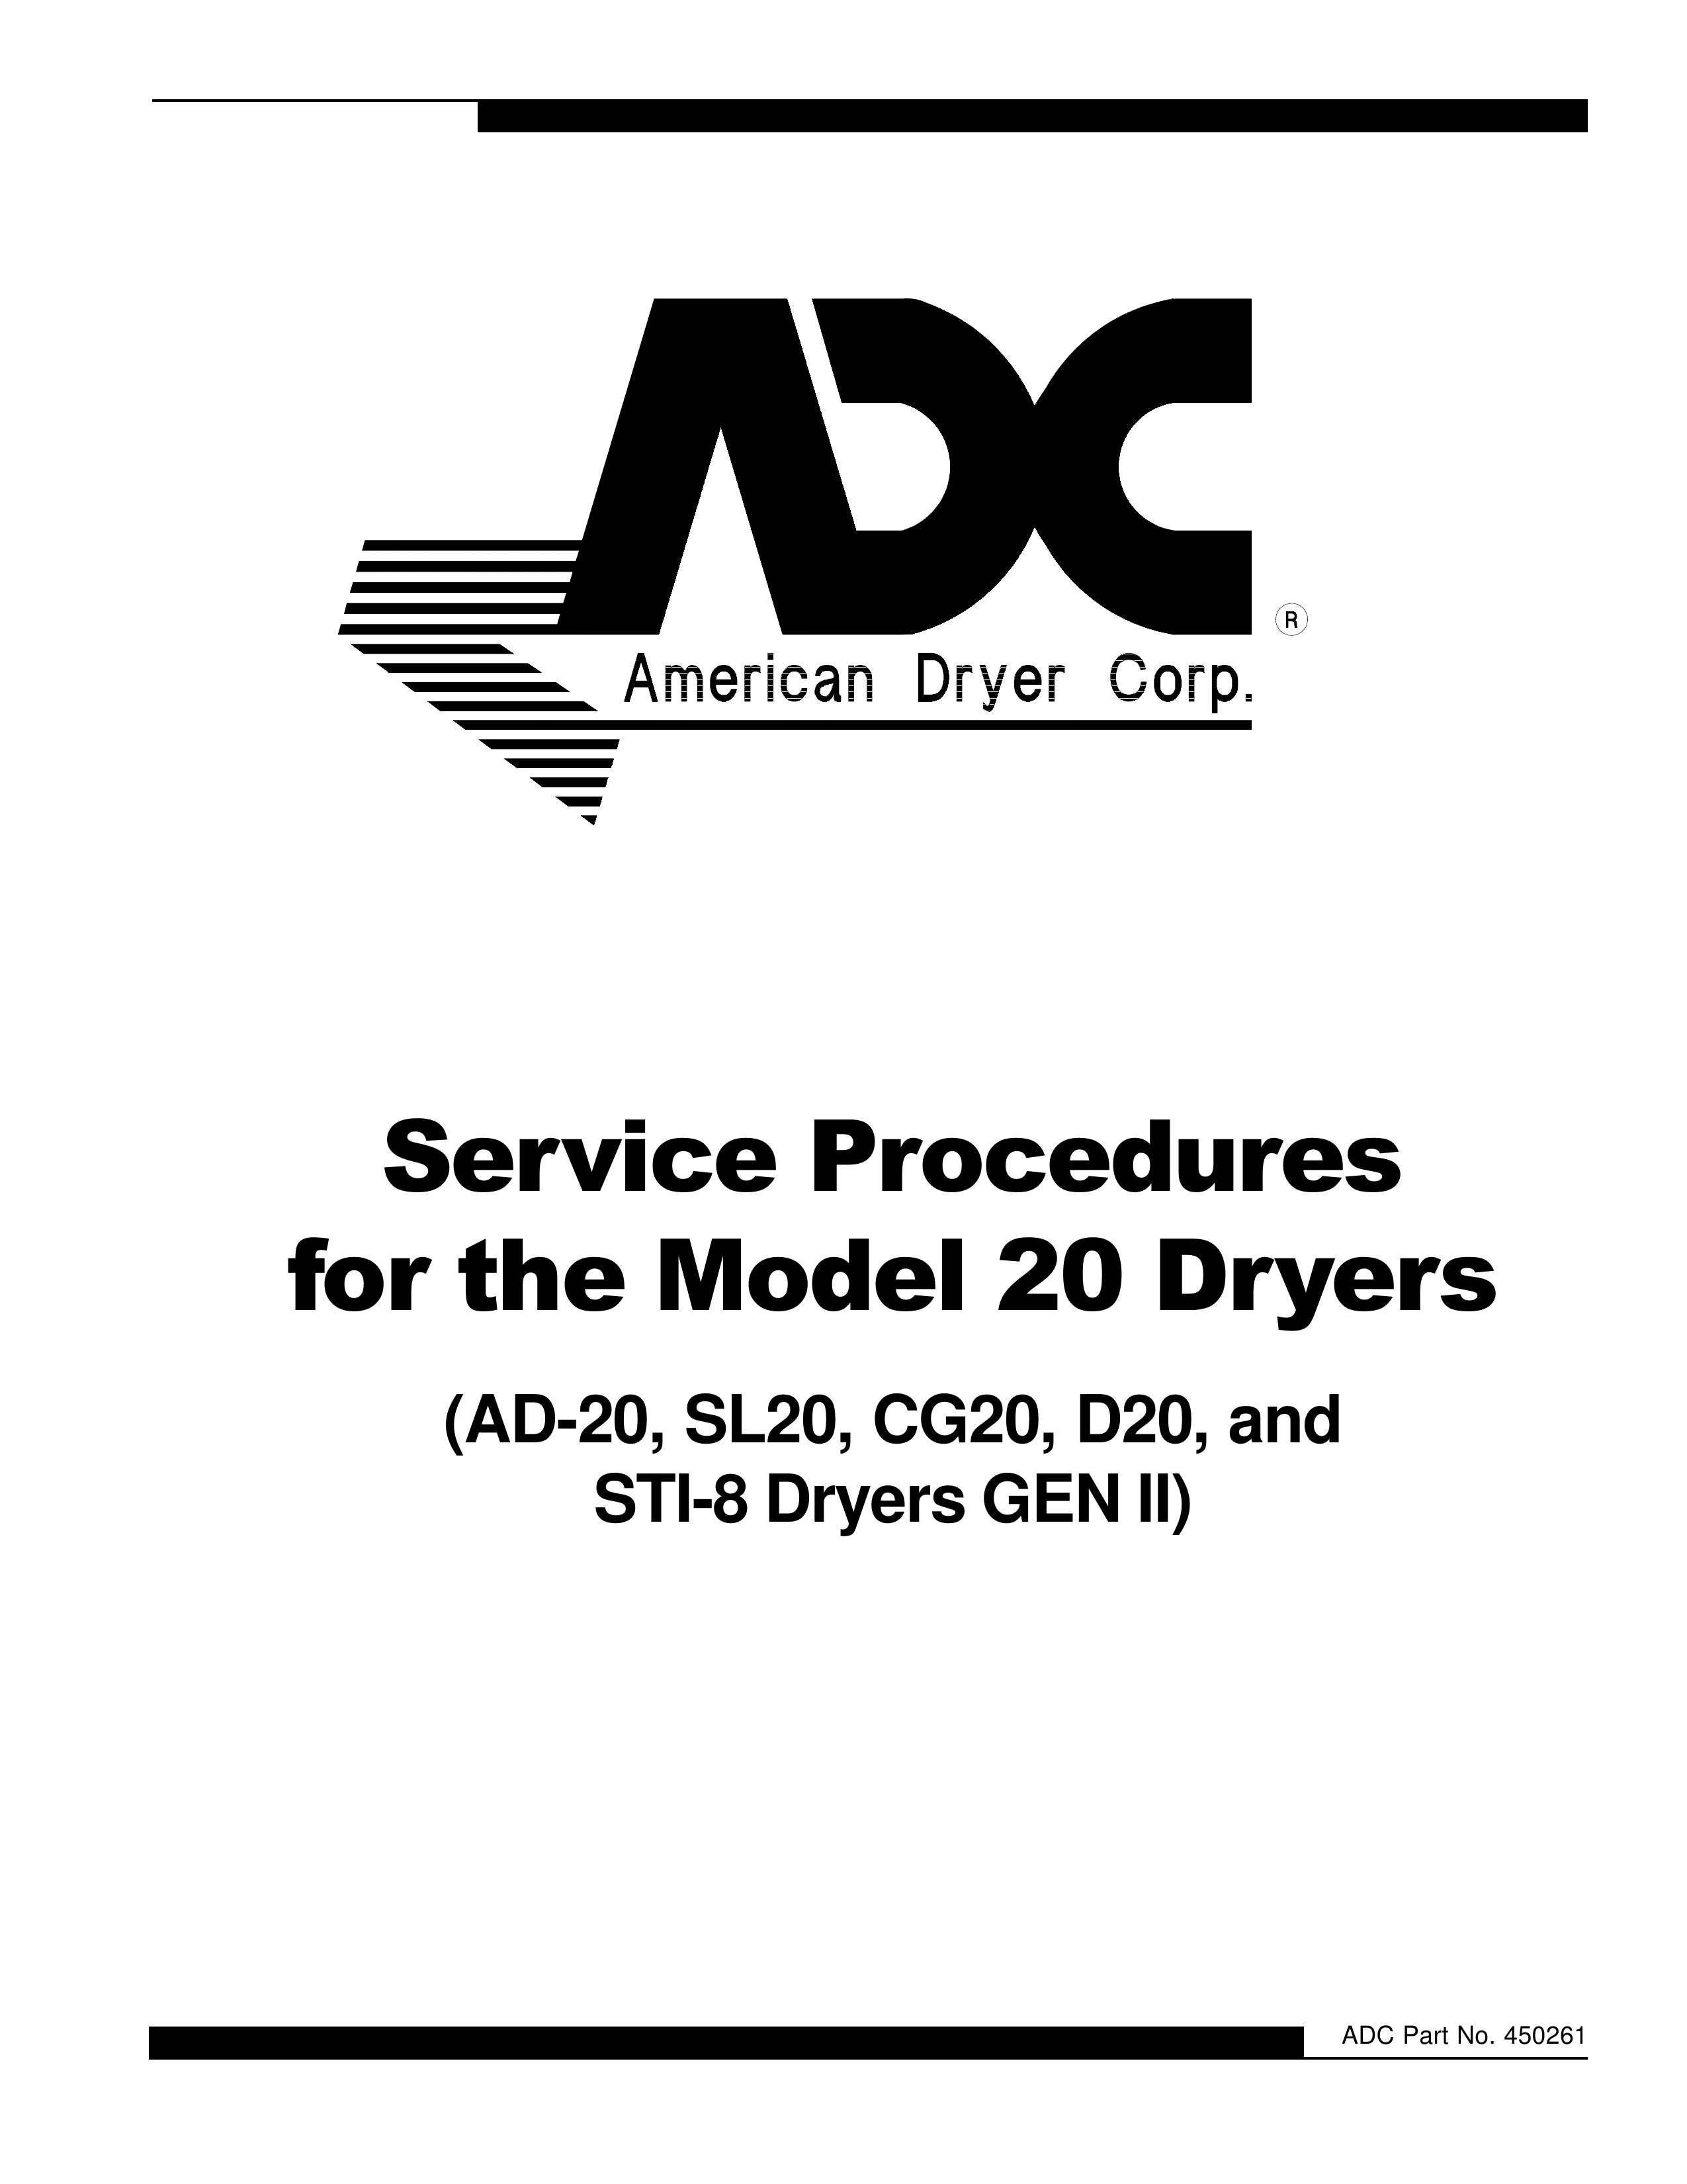 American Dryer Corp. AD-20 Clothes Dryer User Manual